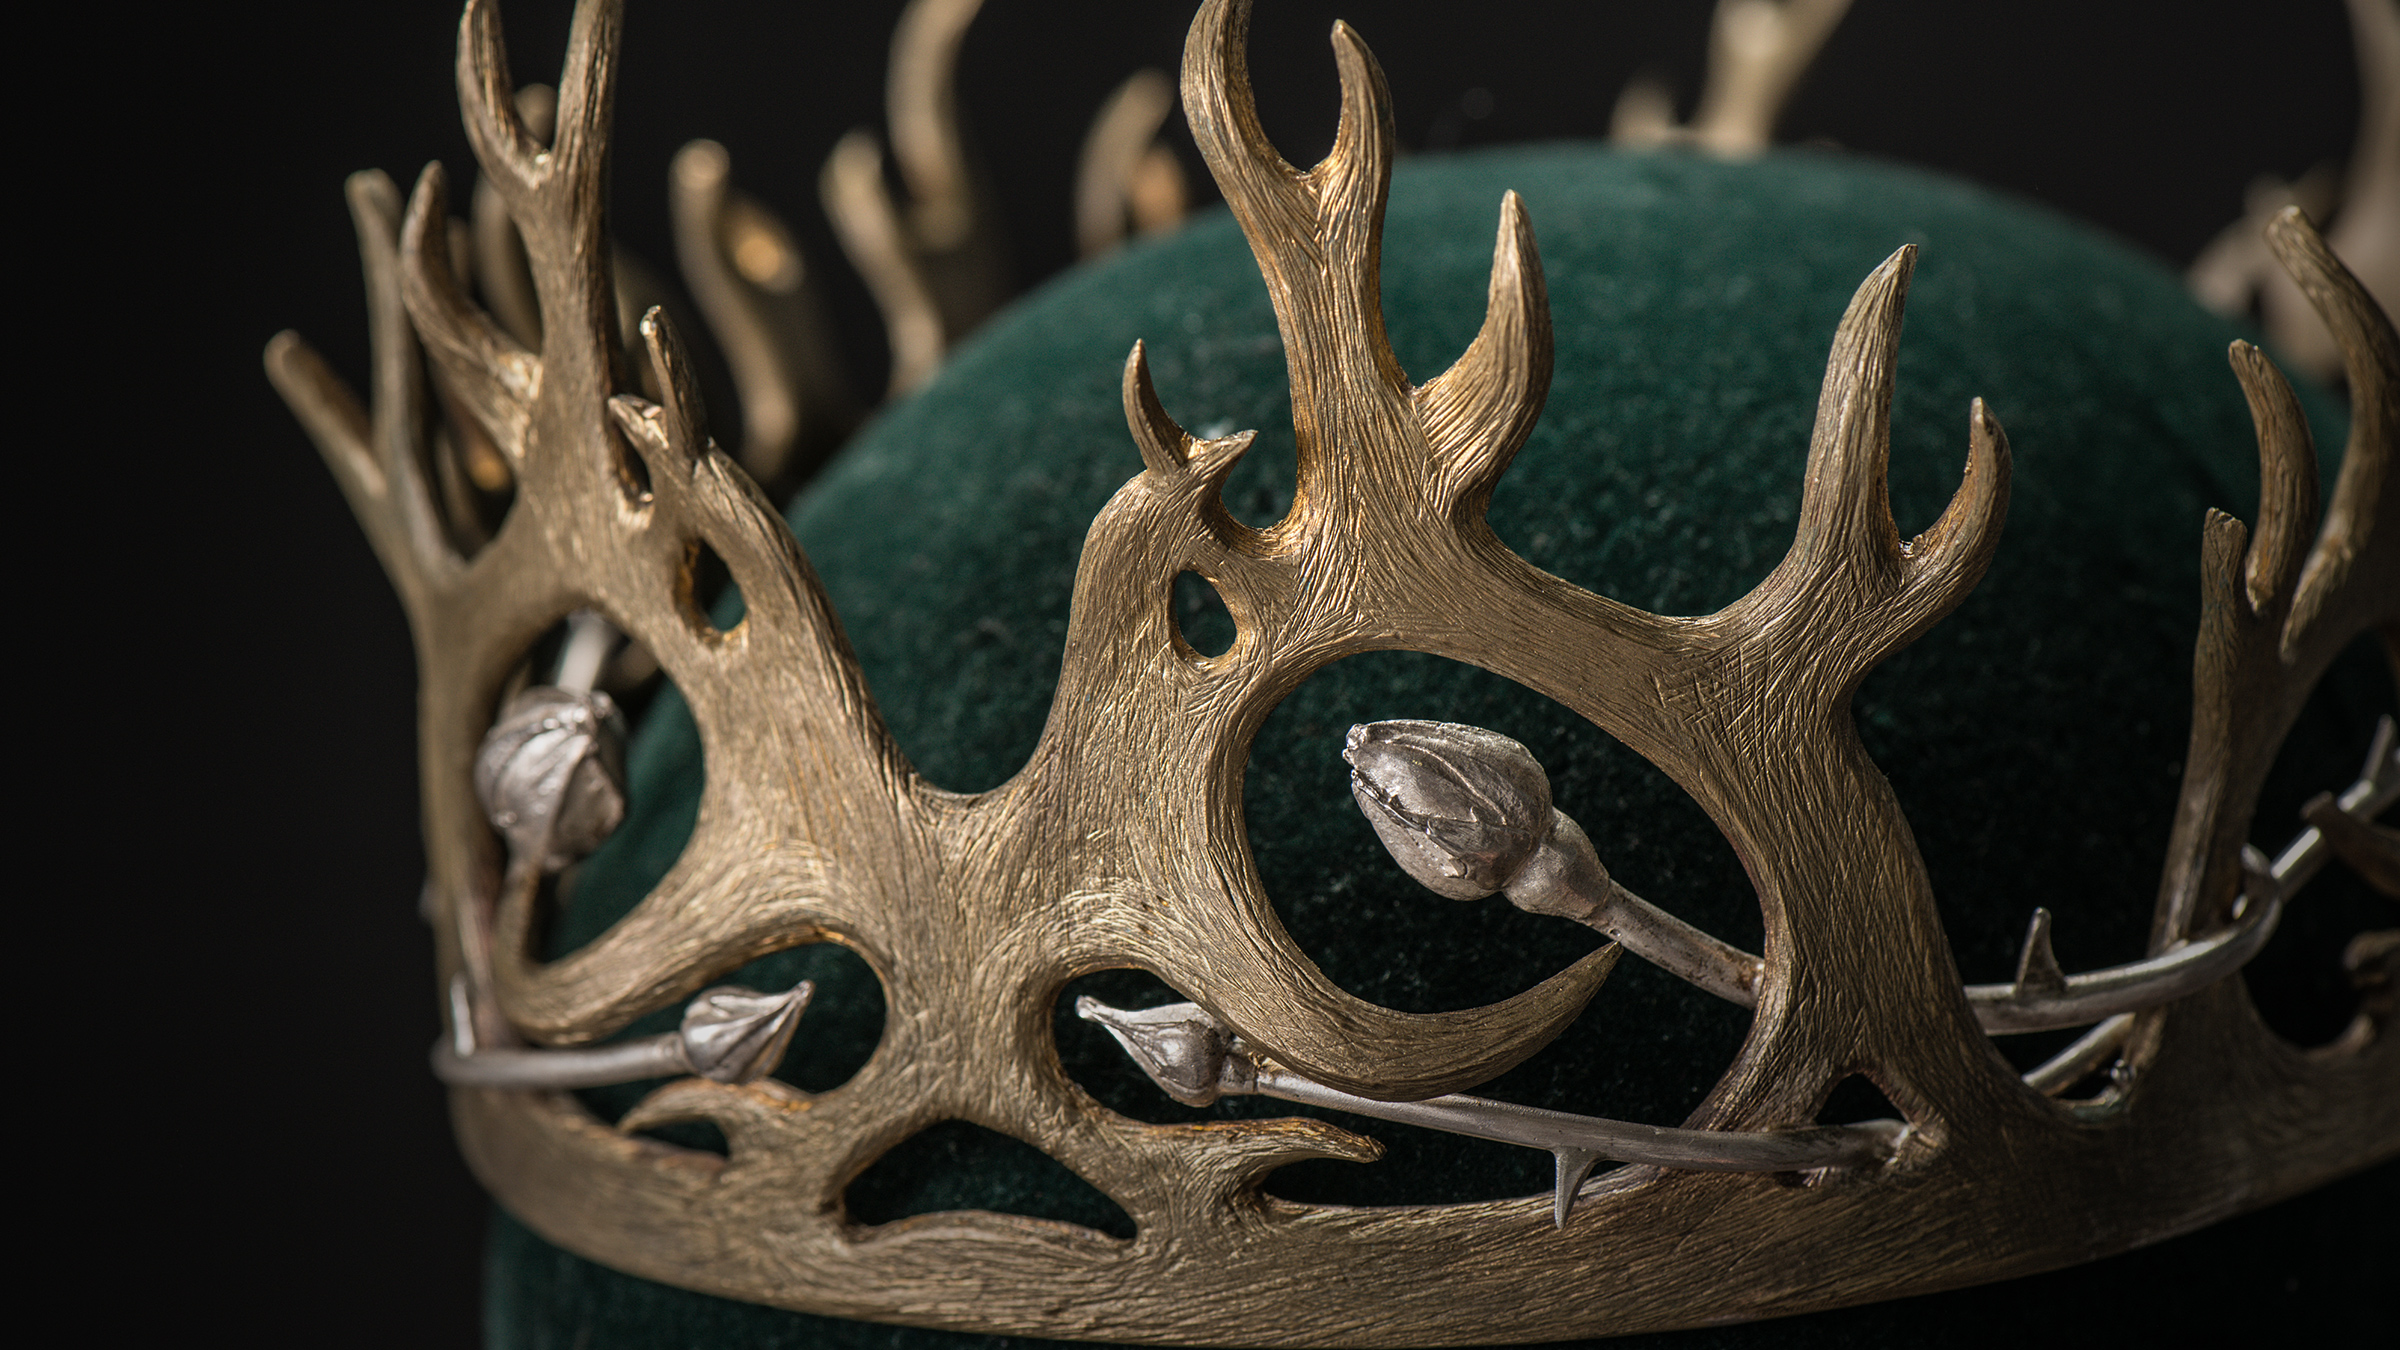 Joffrey’s crown has antlers, but roses are creeping within it. 